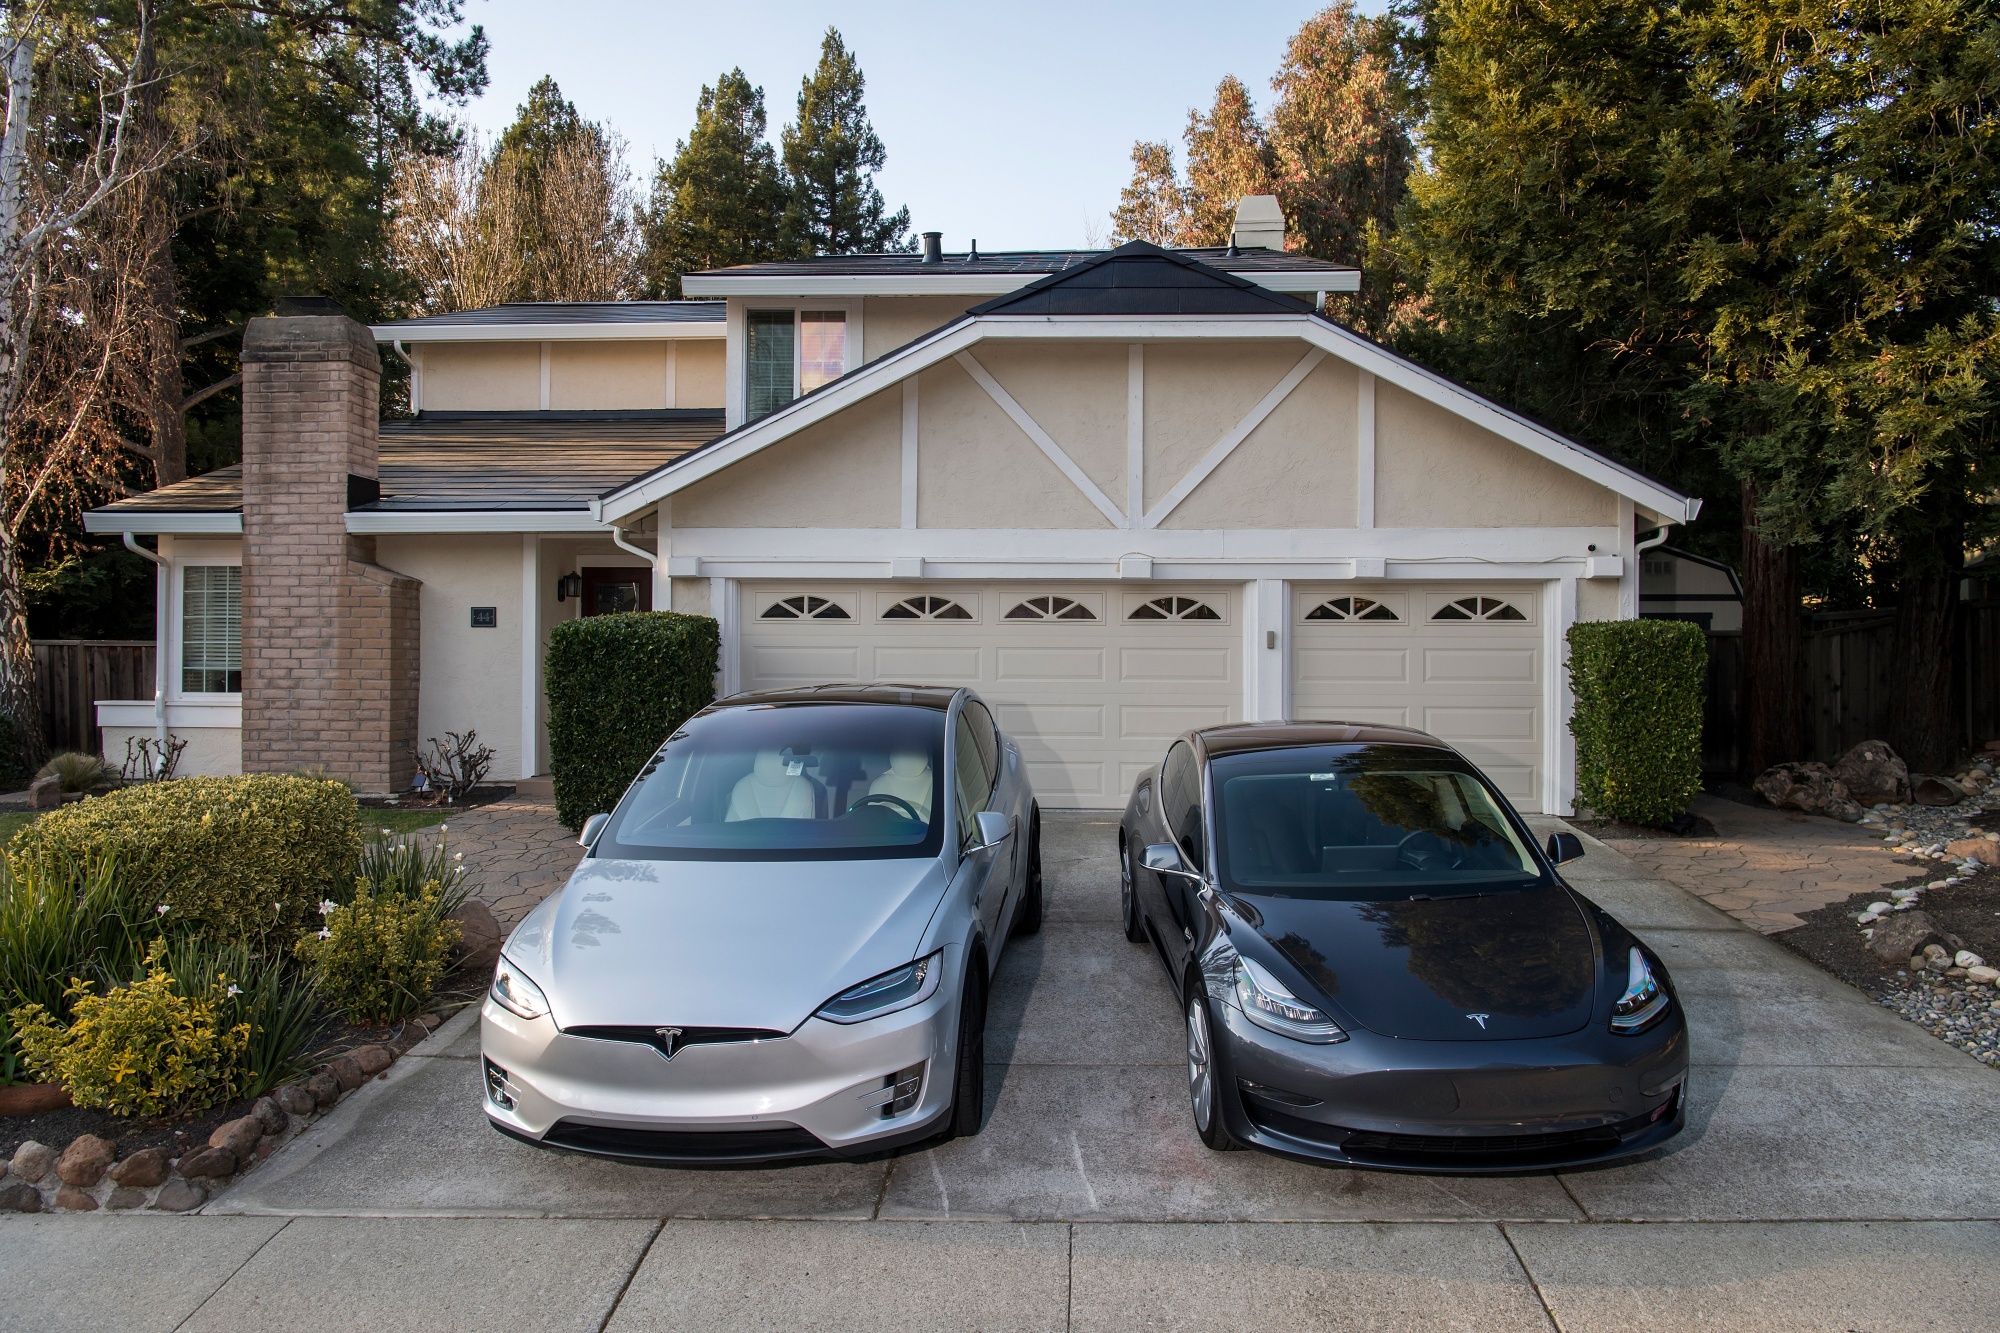 Tesla Model X and Model 3 cars in the driveway of a home with a Tesla Solar Roof in California.